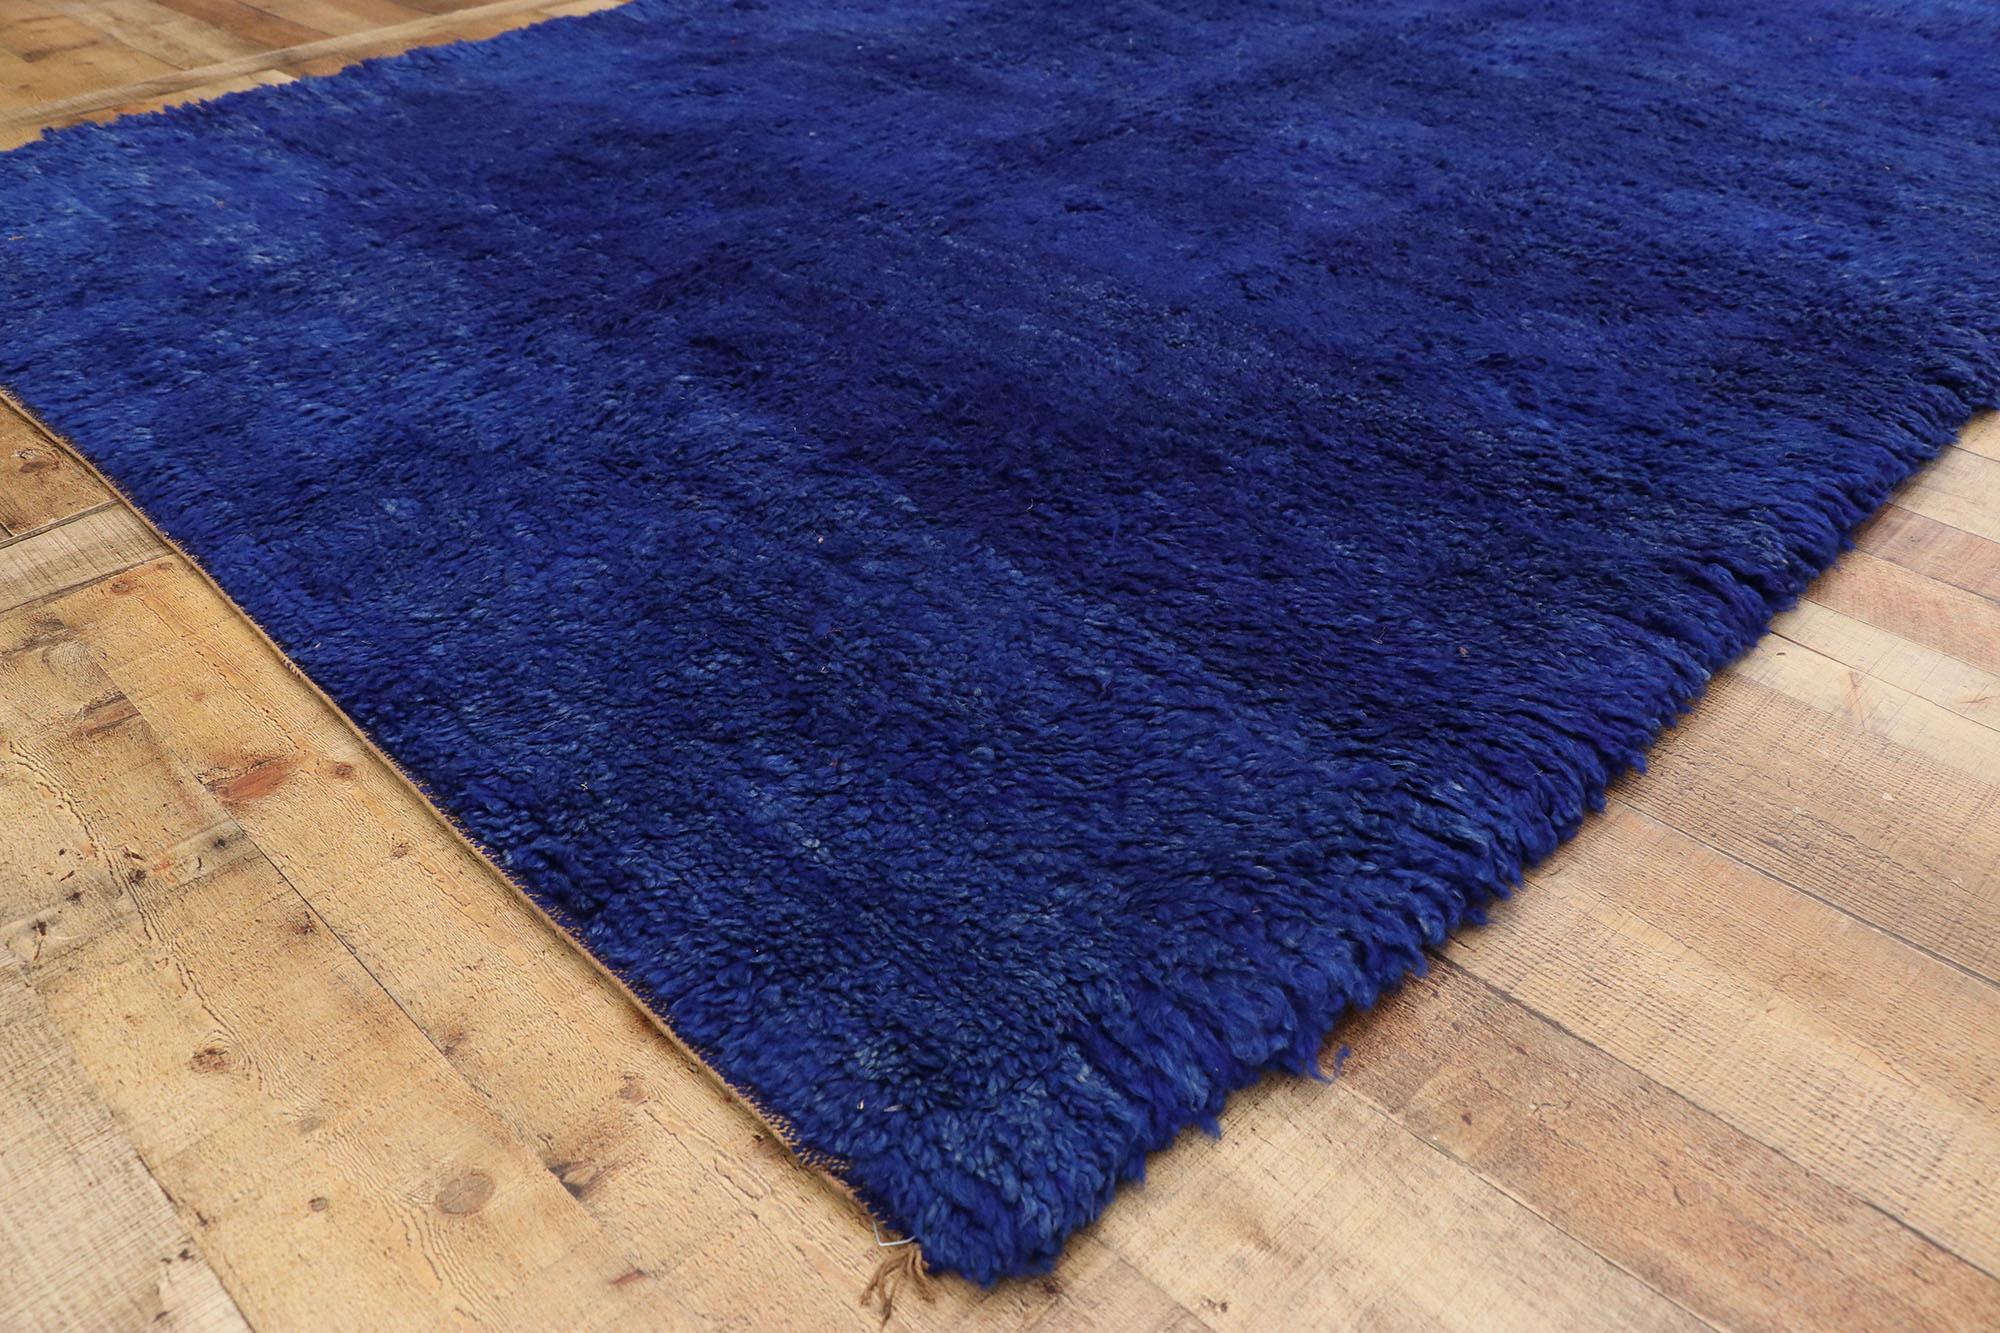 Vintage Blue Beni Mrirt Moroccan Rug, Cozy Nomad Meets Tribal Enchantment In Good Condition For Sale In Dallas, TX